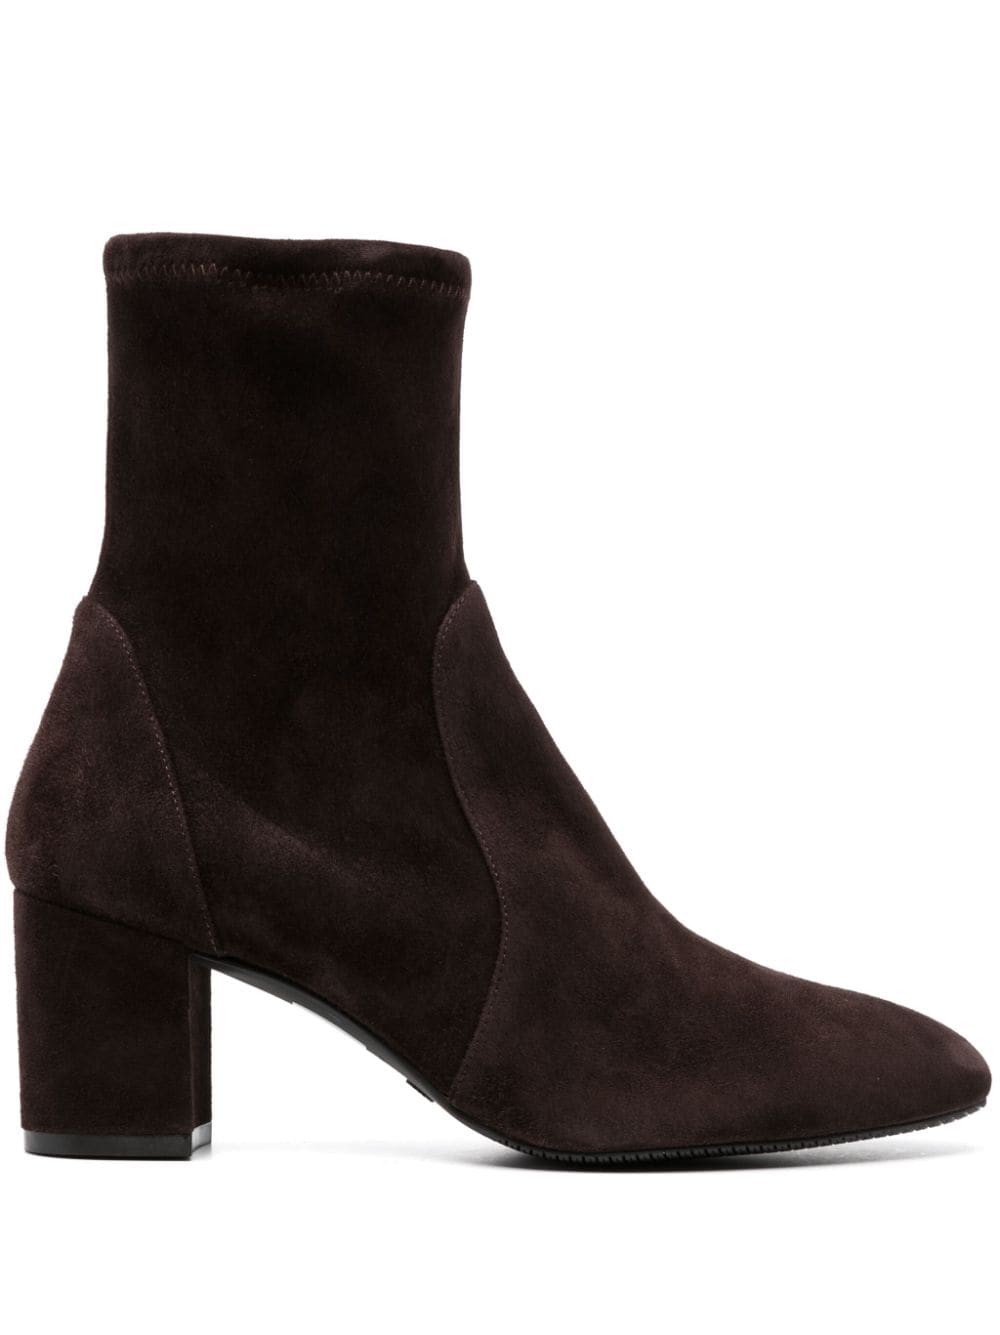 Stuart Weitzman Yuliana 80mm Suede Ankle Boots In Brown